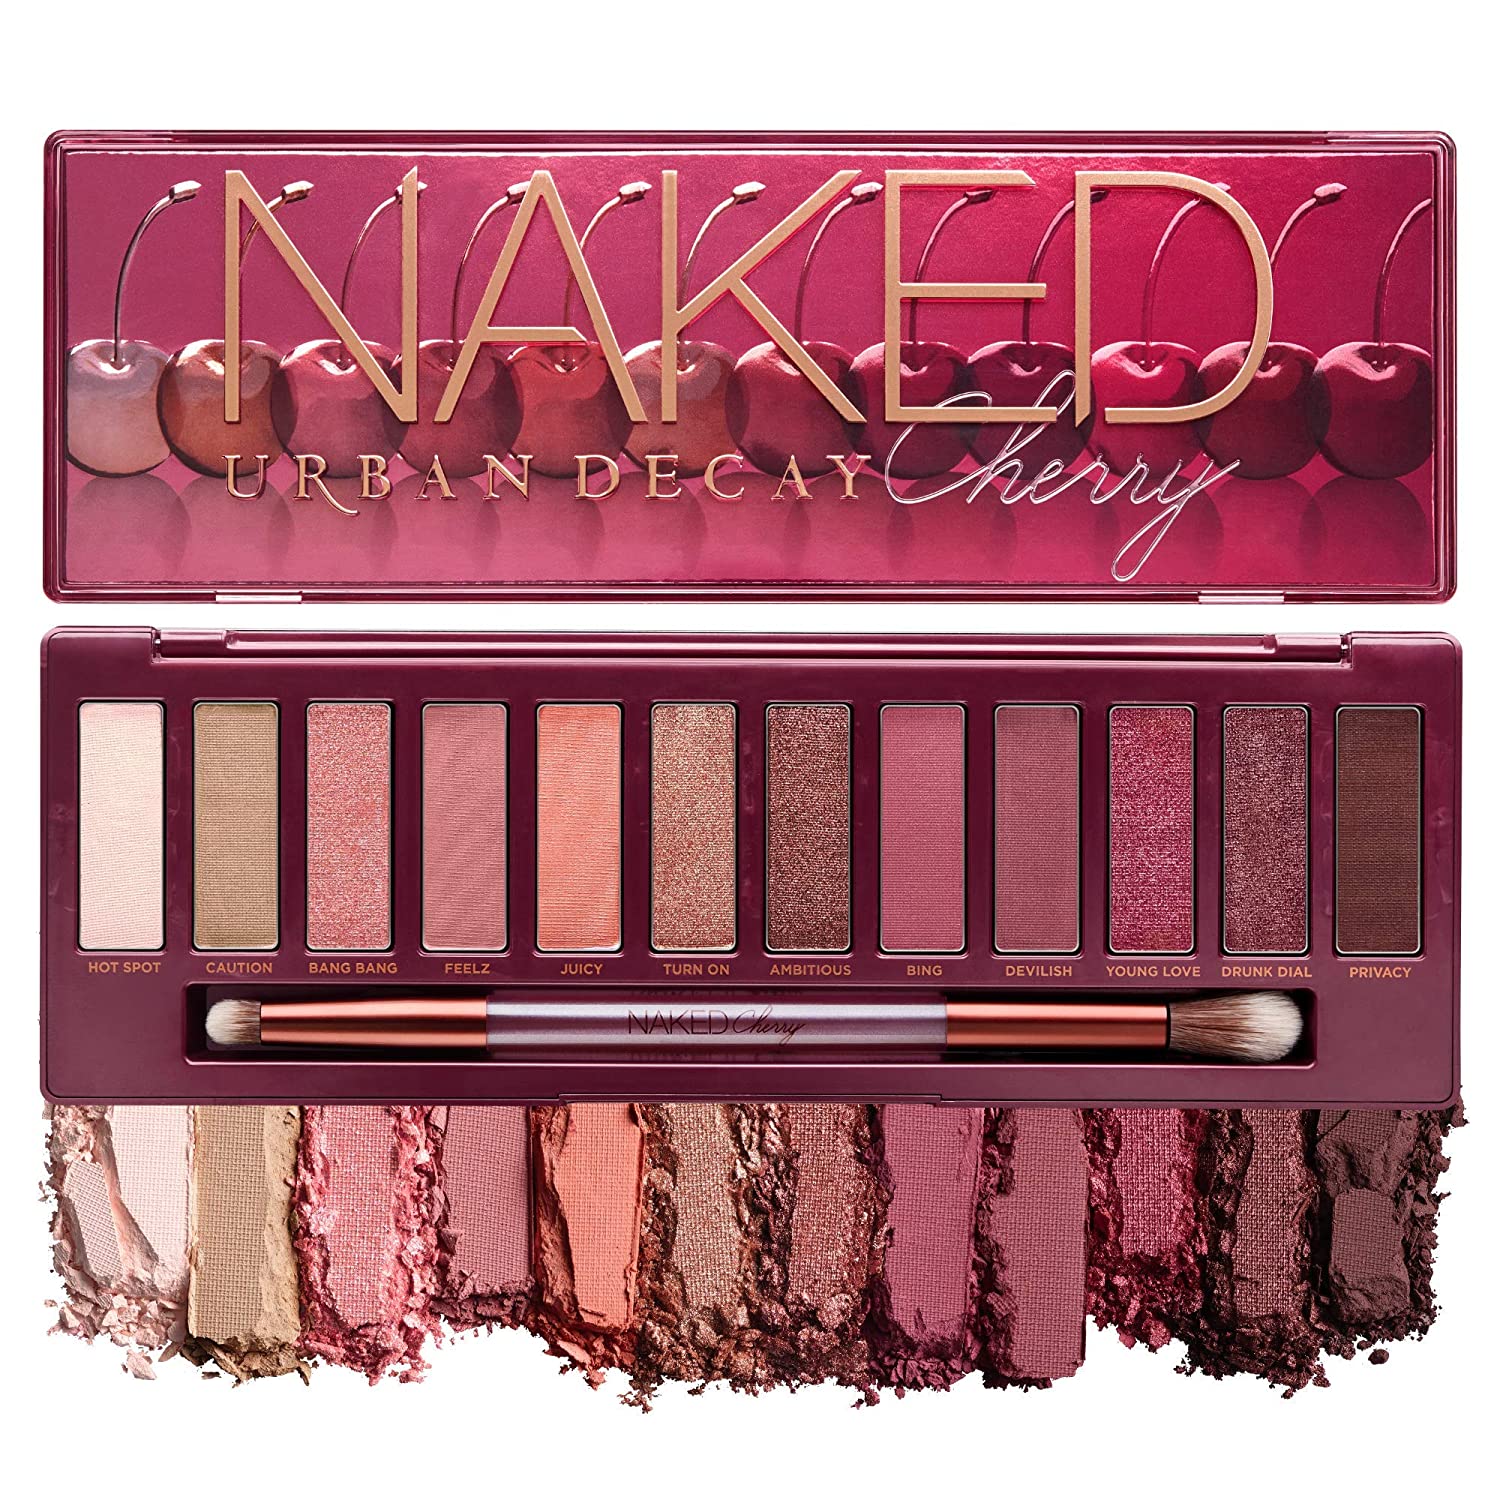 Urban Decay Naked Cherry Eyeshadow Palette $24.50 + Free Shipping